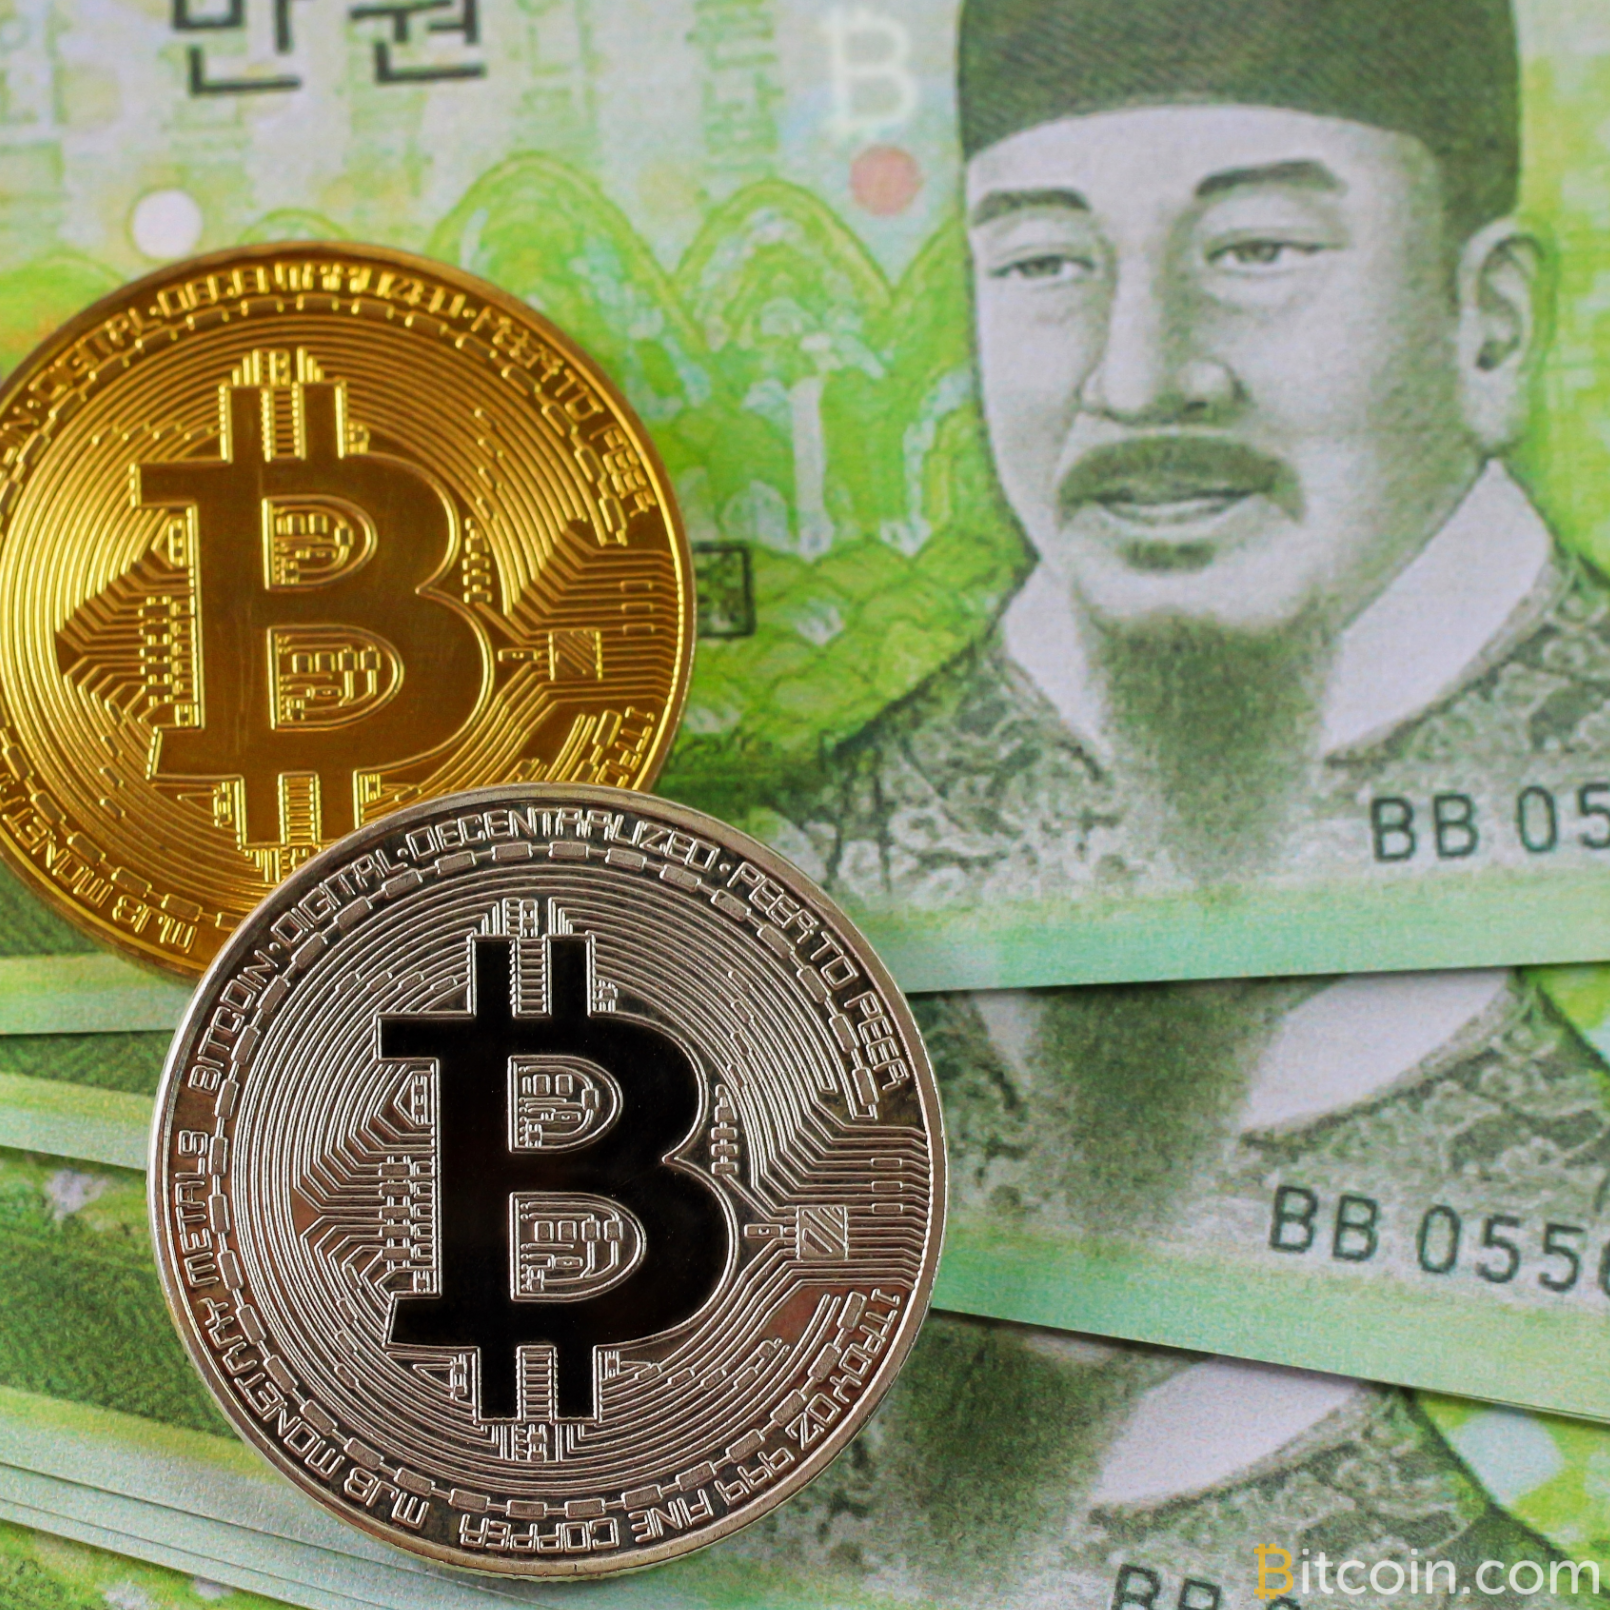 South Korea Announces Crypto Traders Could Face Fines Under New System